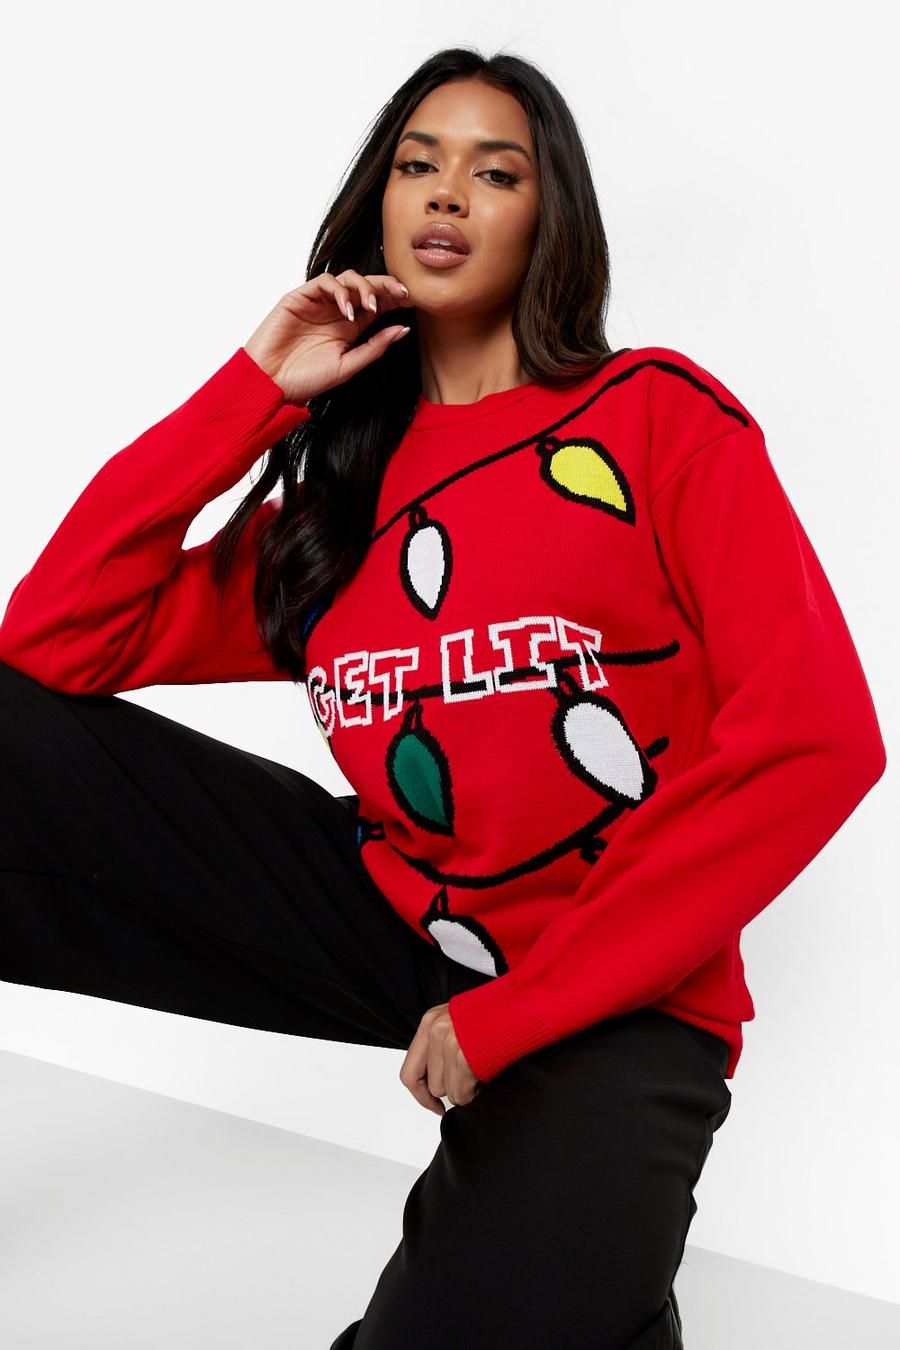 Red Lit Lit Christmas Sweater